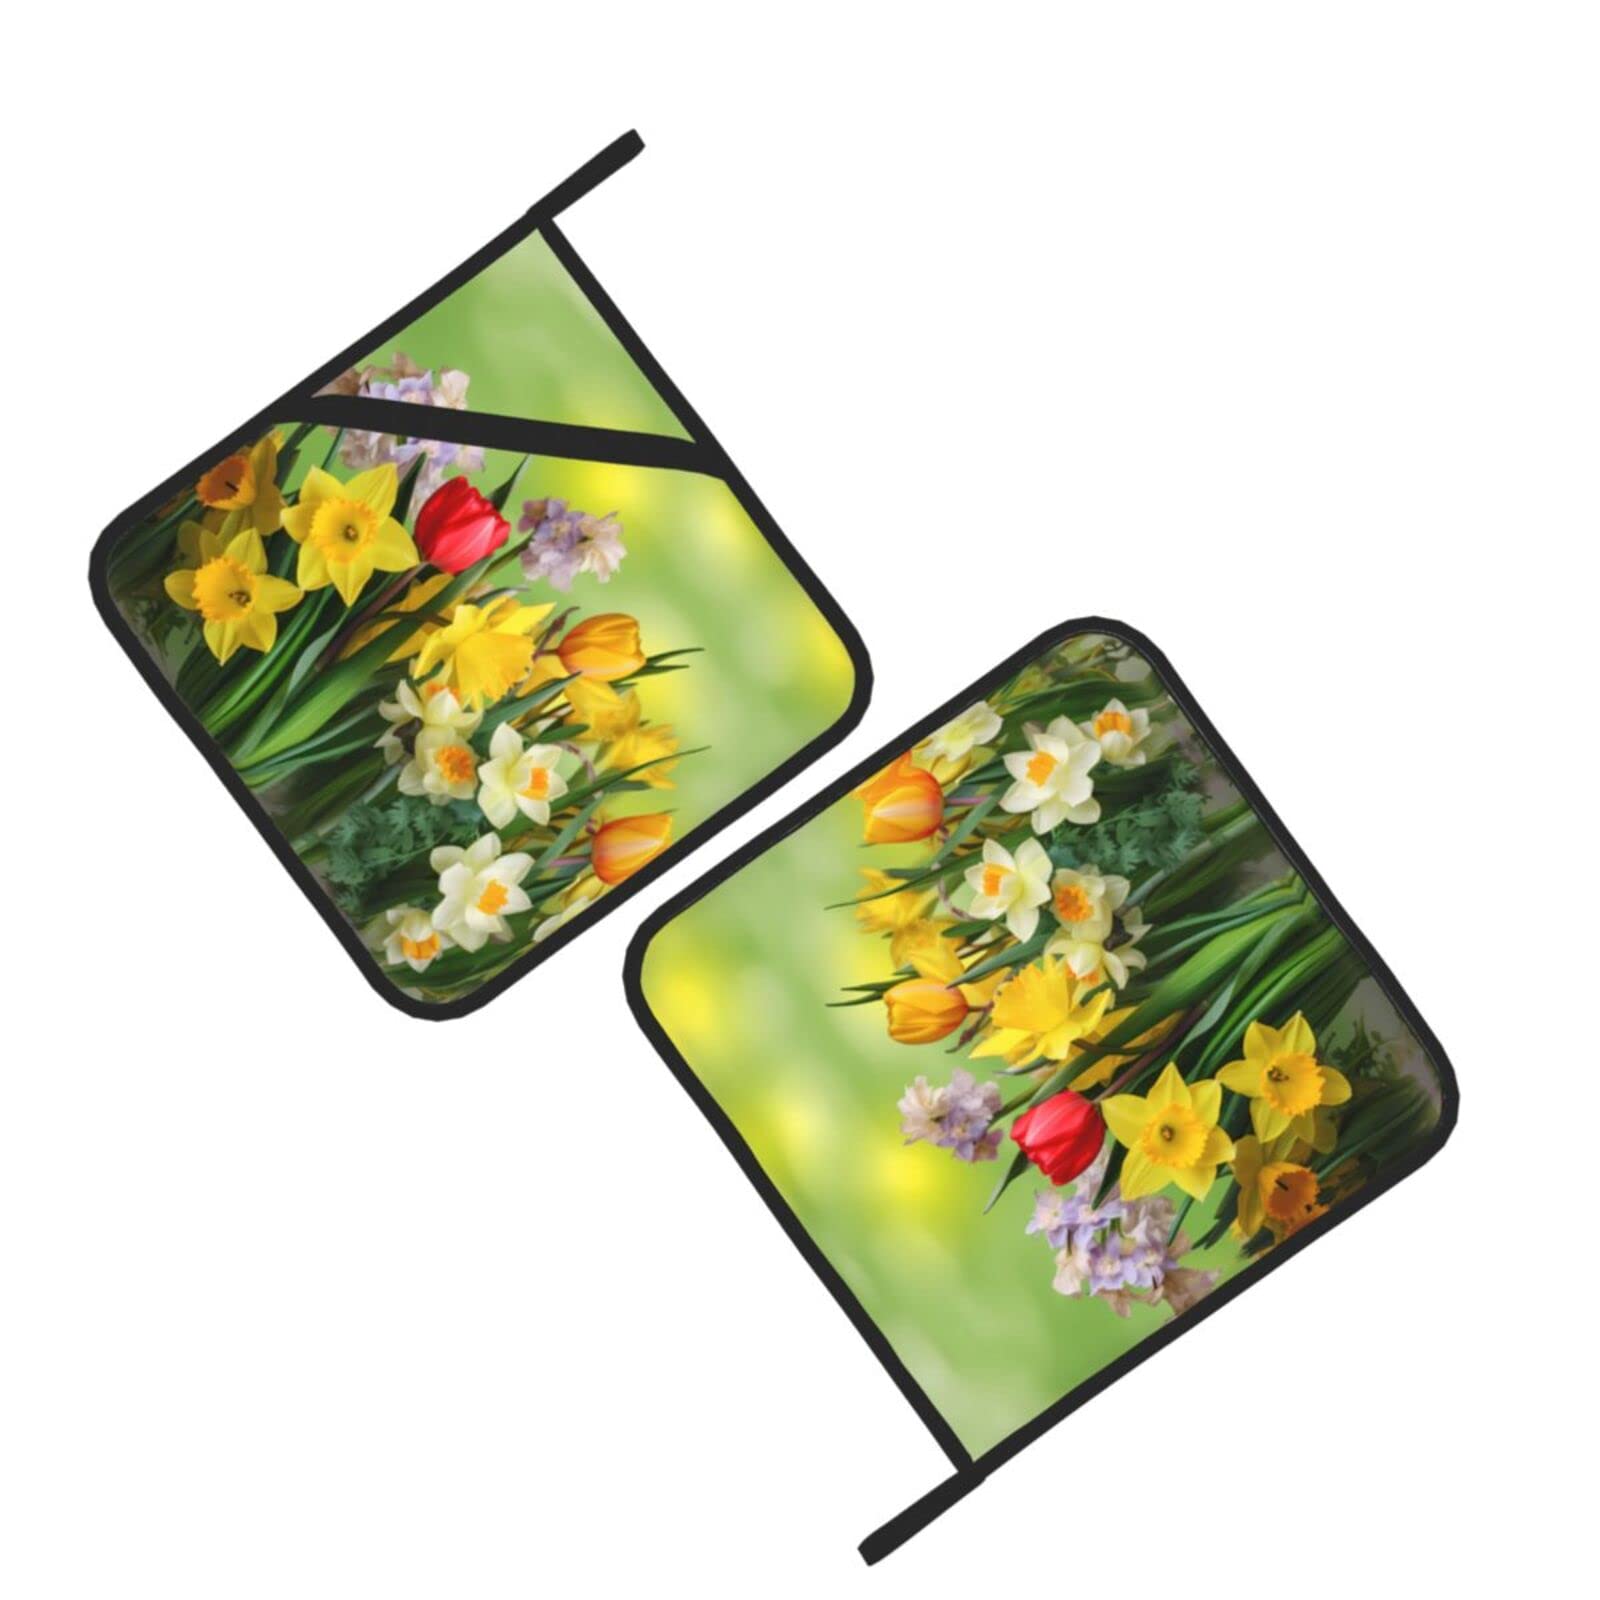 Spring Flowers and Tulips Pot Holders Set of 2 with Loop Heat Resistant Hot Pads for Cooking Baking Grilling